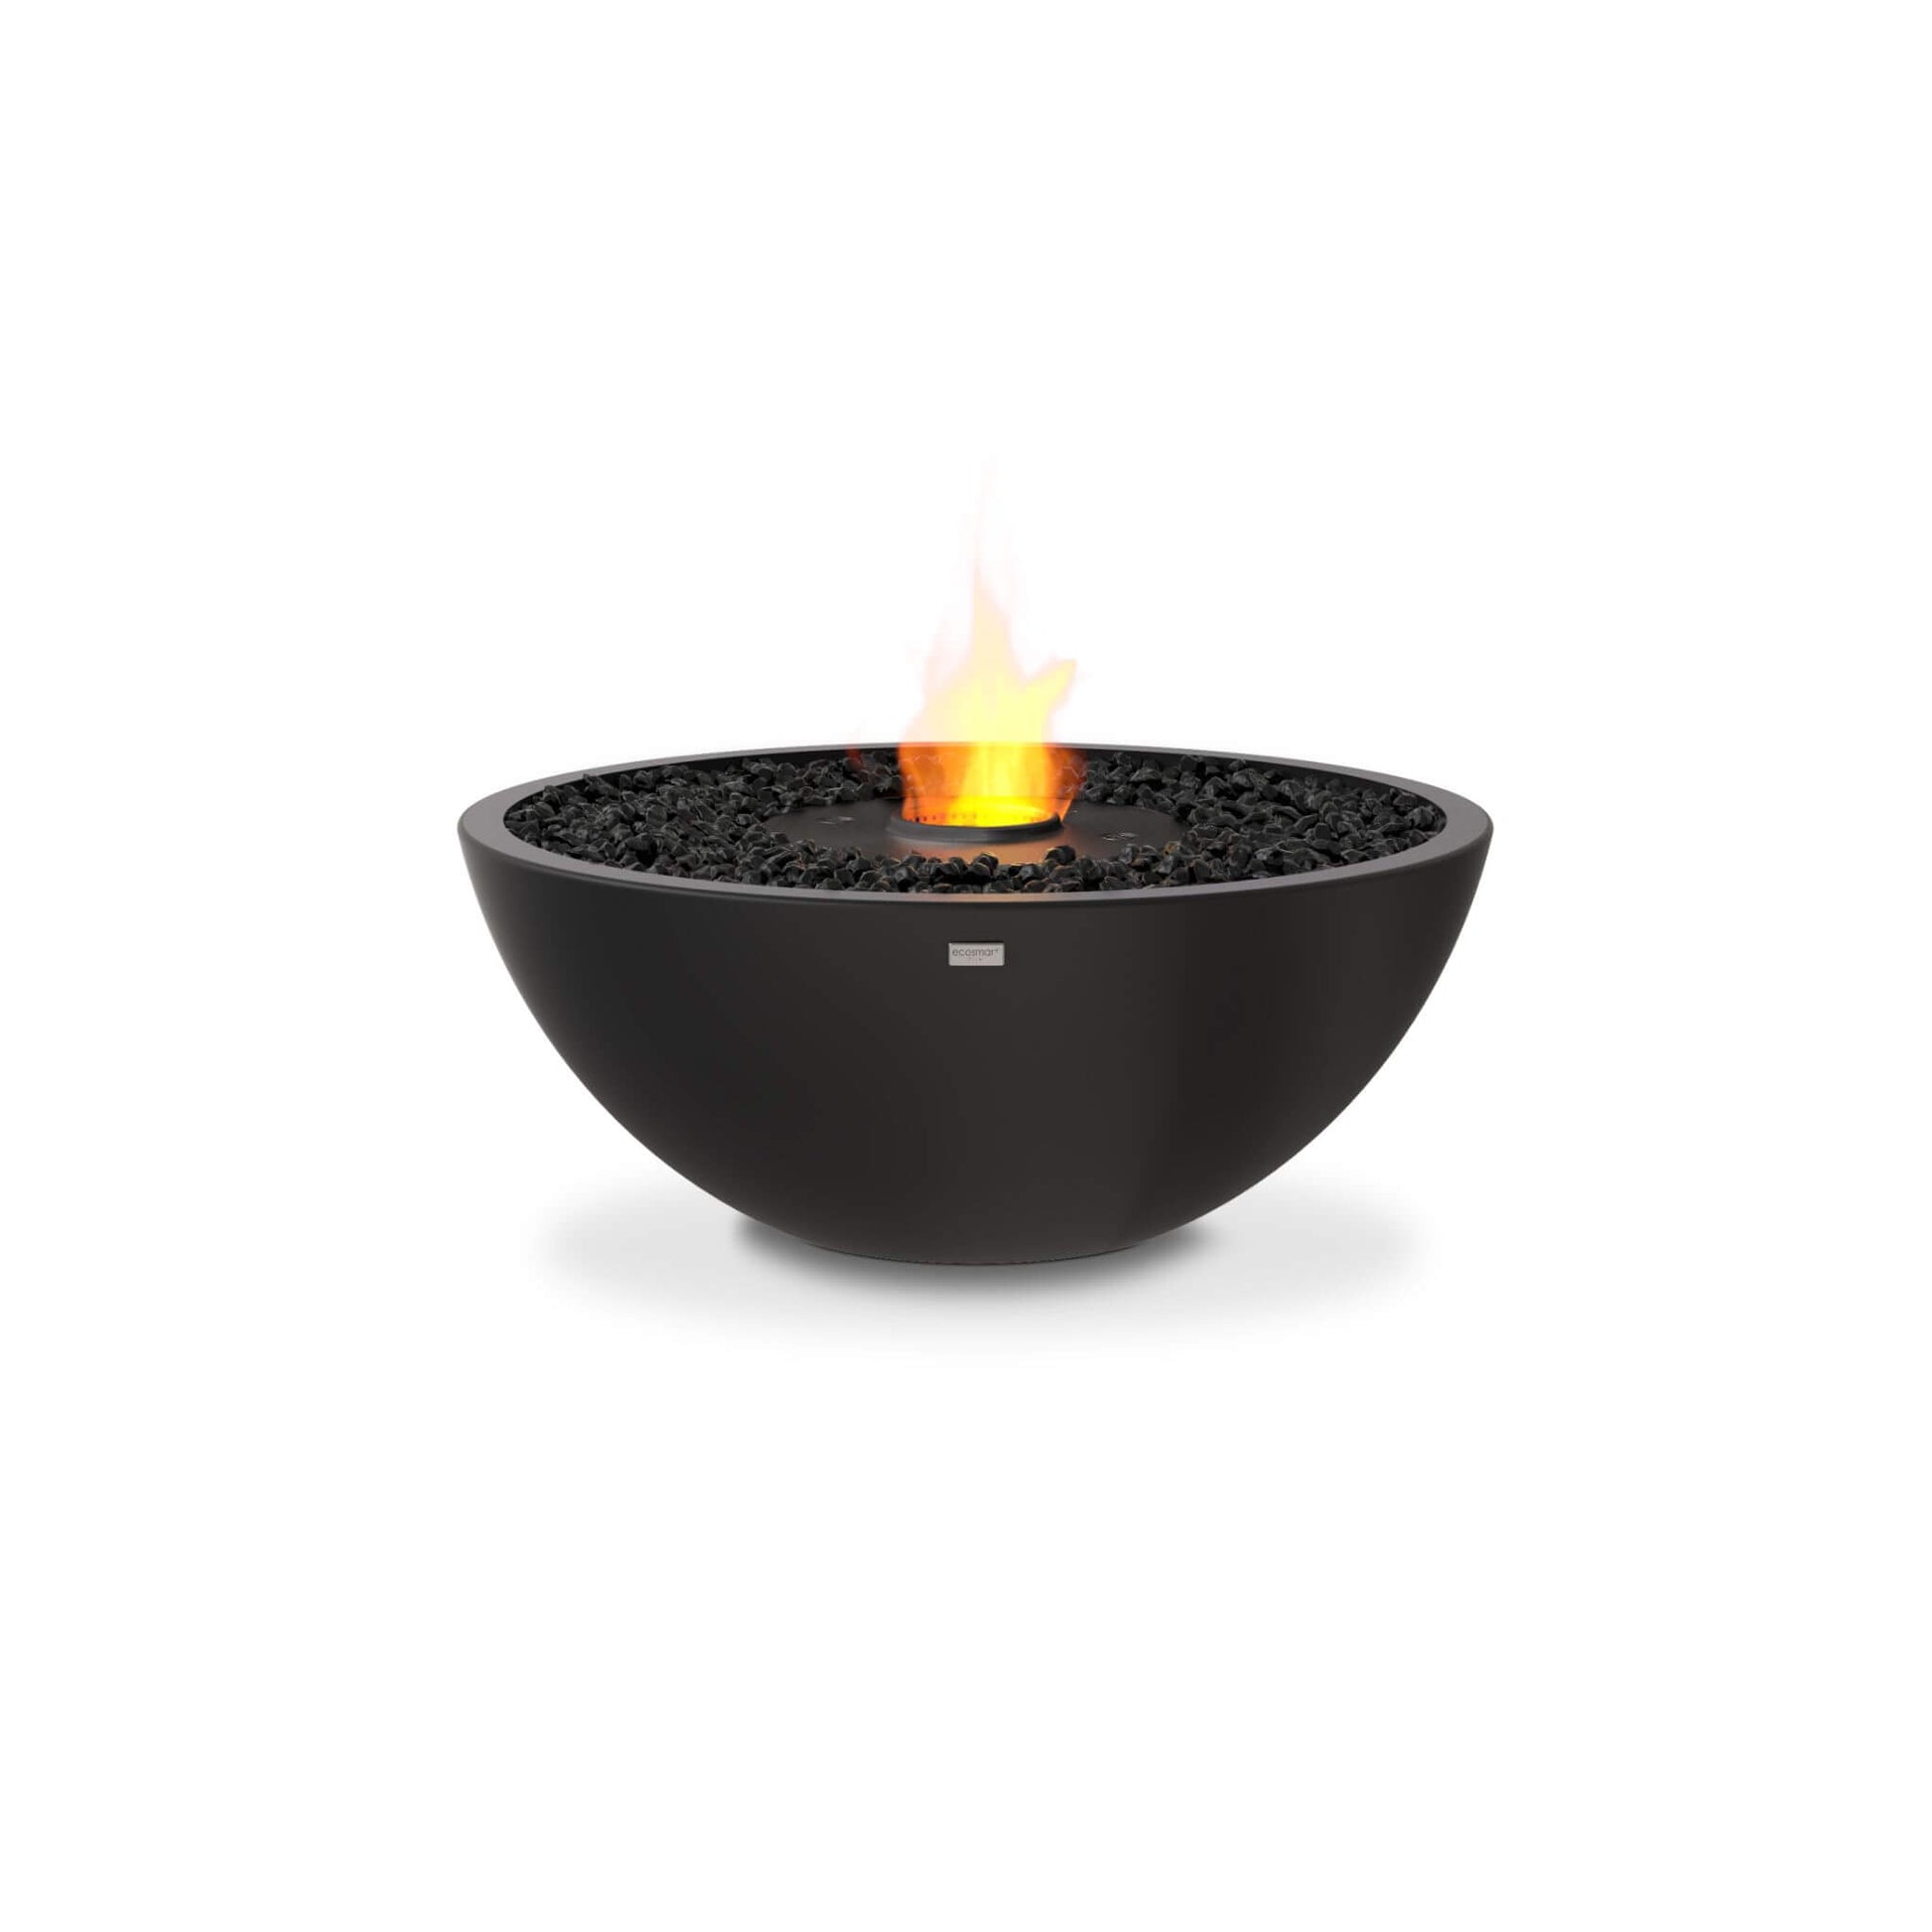 Ecosmart Fire Mix 850 bioethanol fire pit bowl in black concrete with a black steel burner and decorative black charcoal